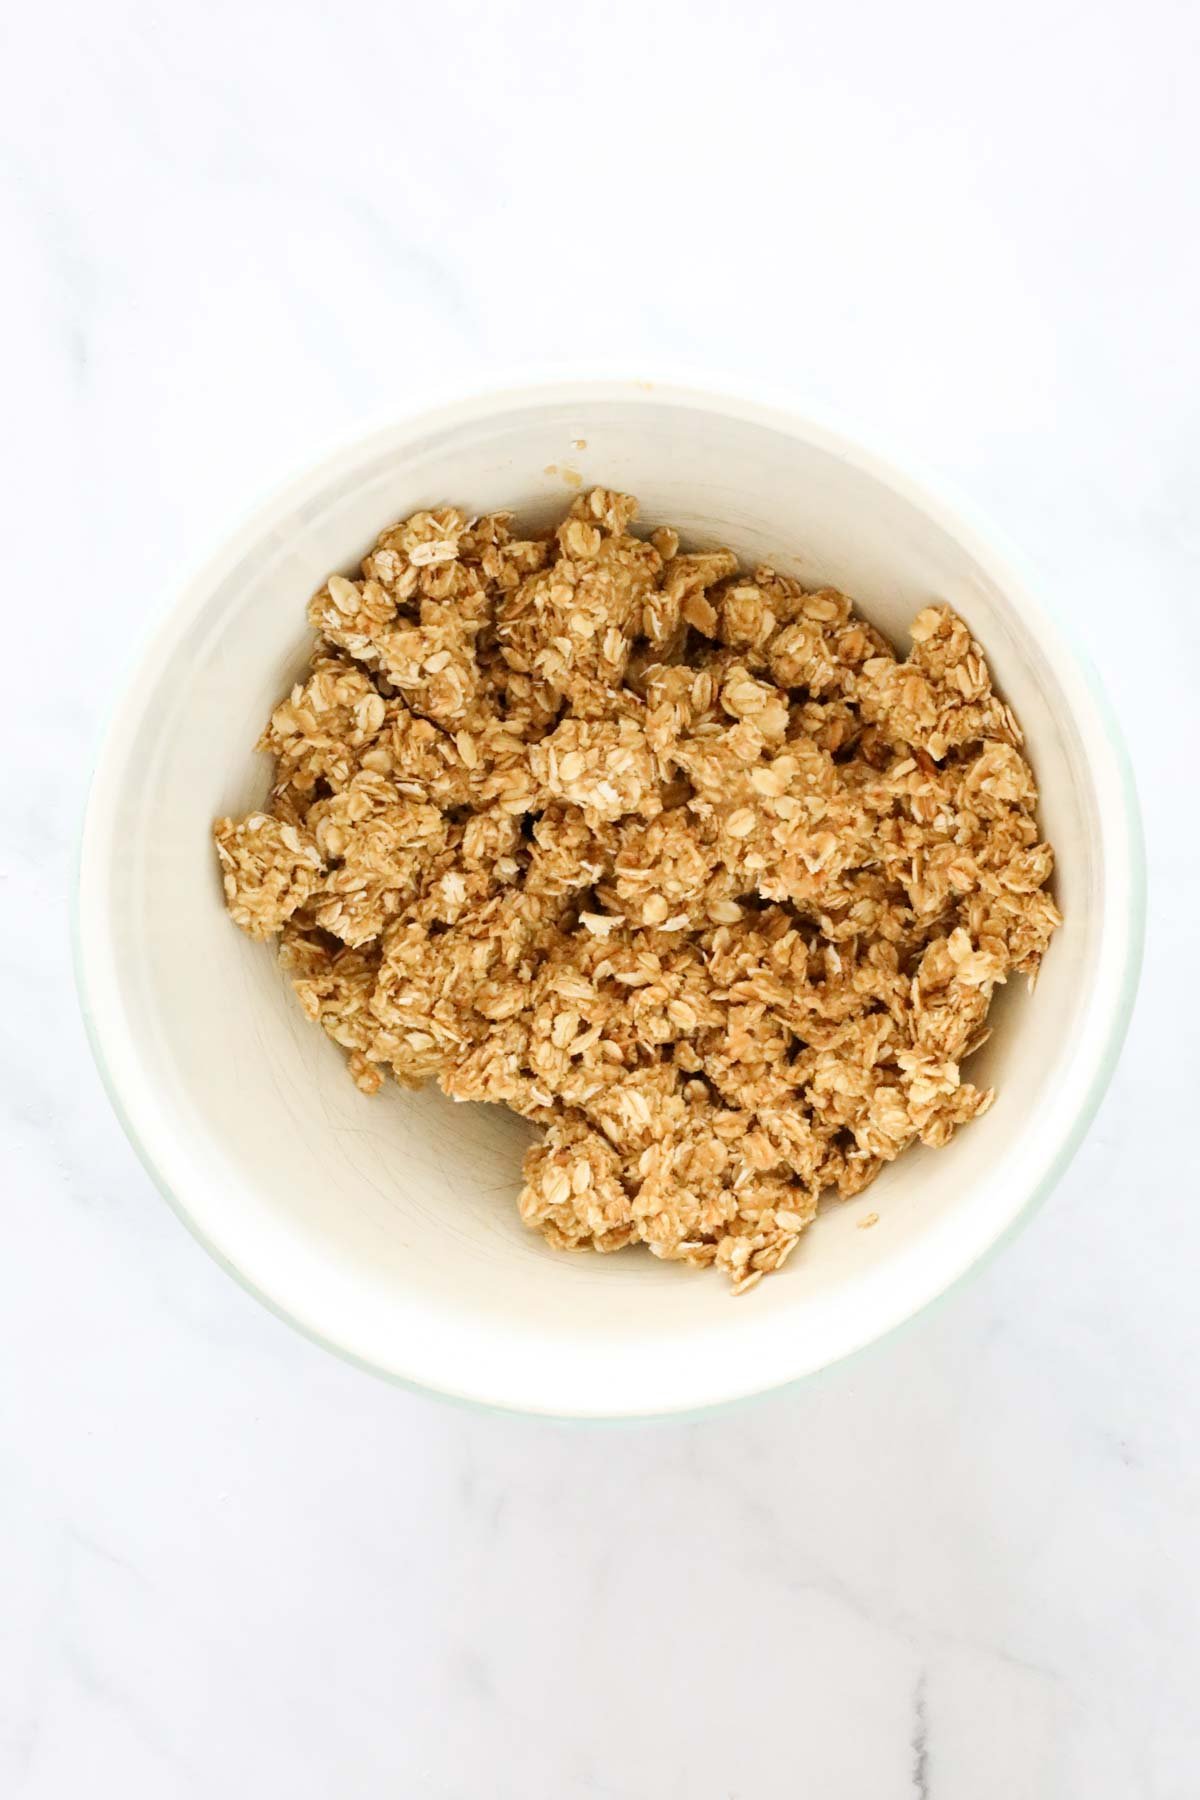 Oat crumble in a bowl.